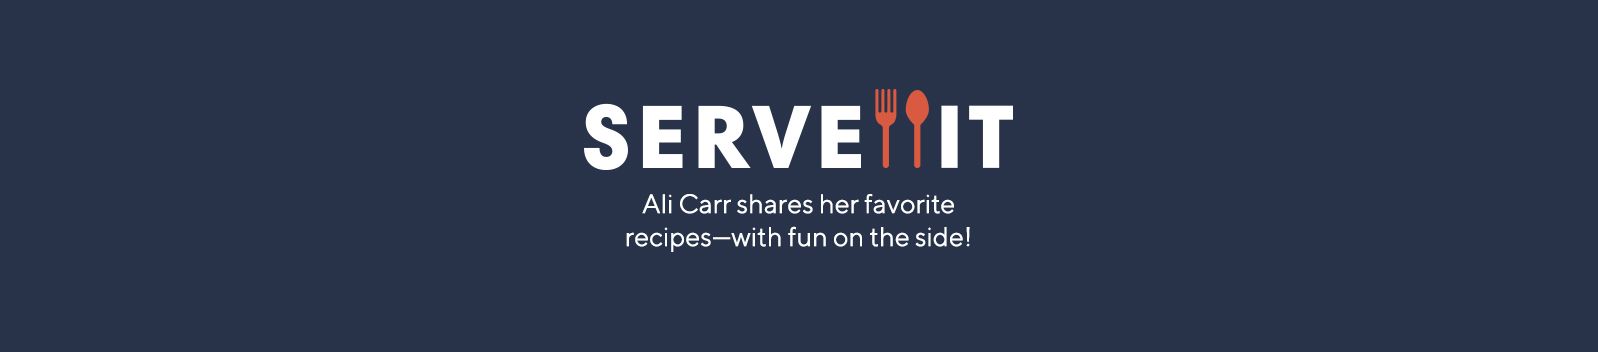 Ali Carr shares her favorite recipes—with fun on the side!